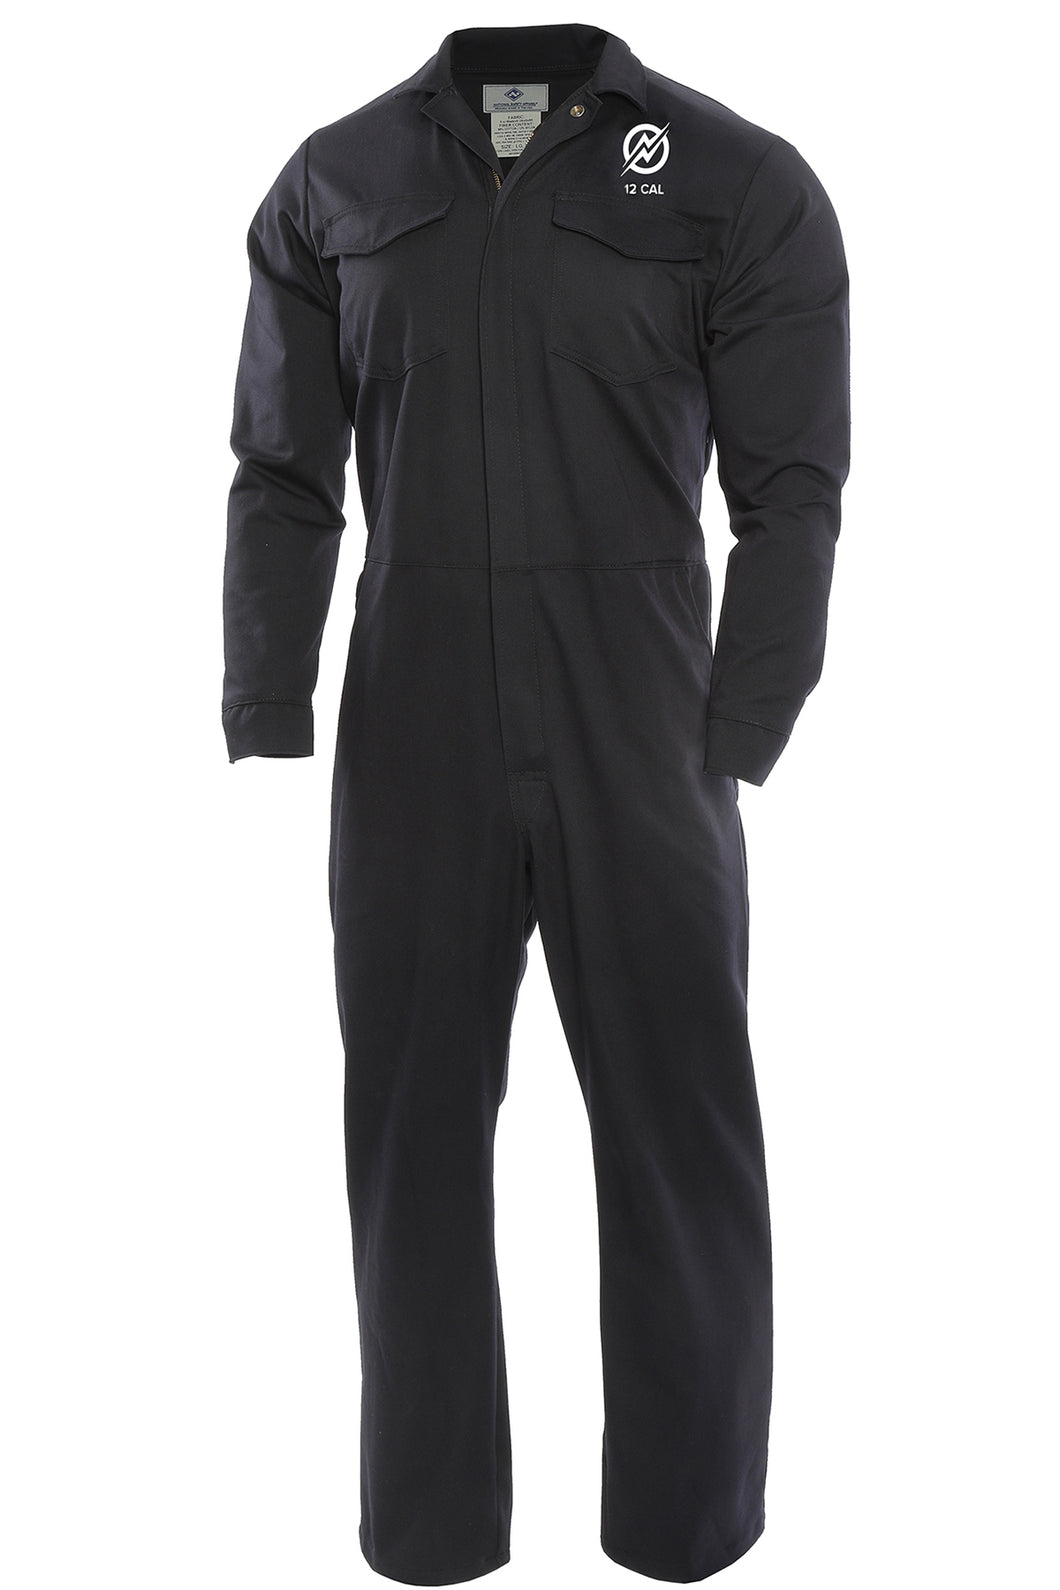 Enespro® 12 Cal Coverall